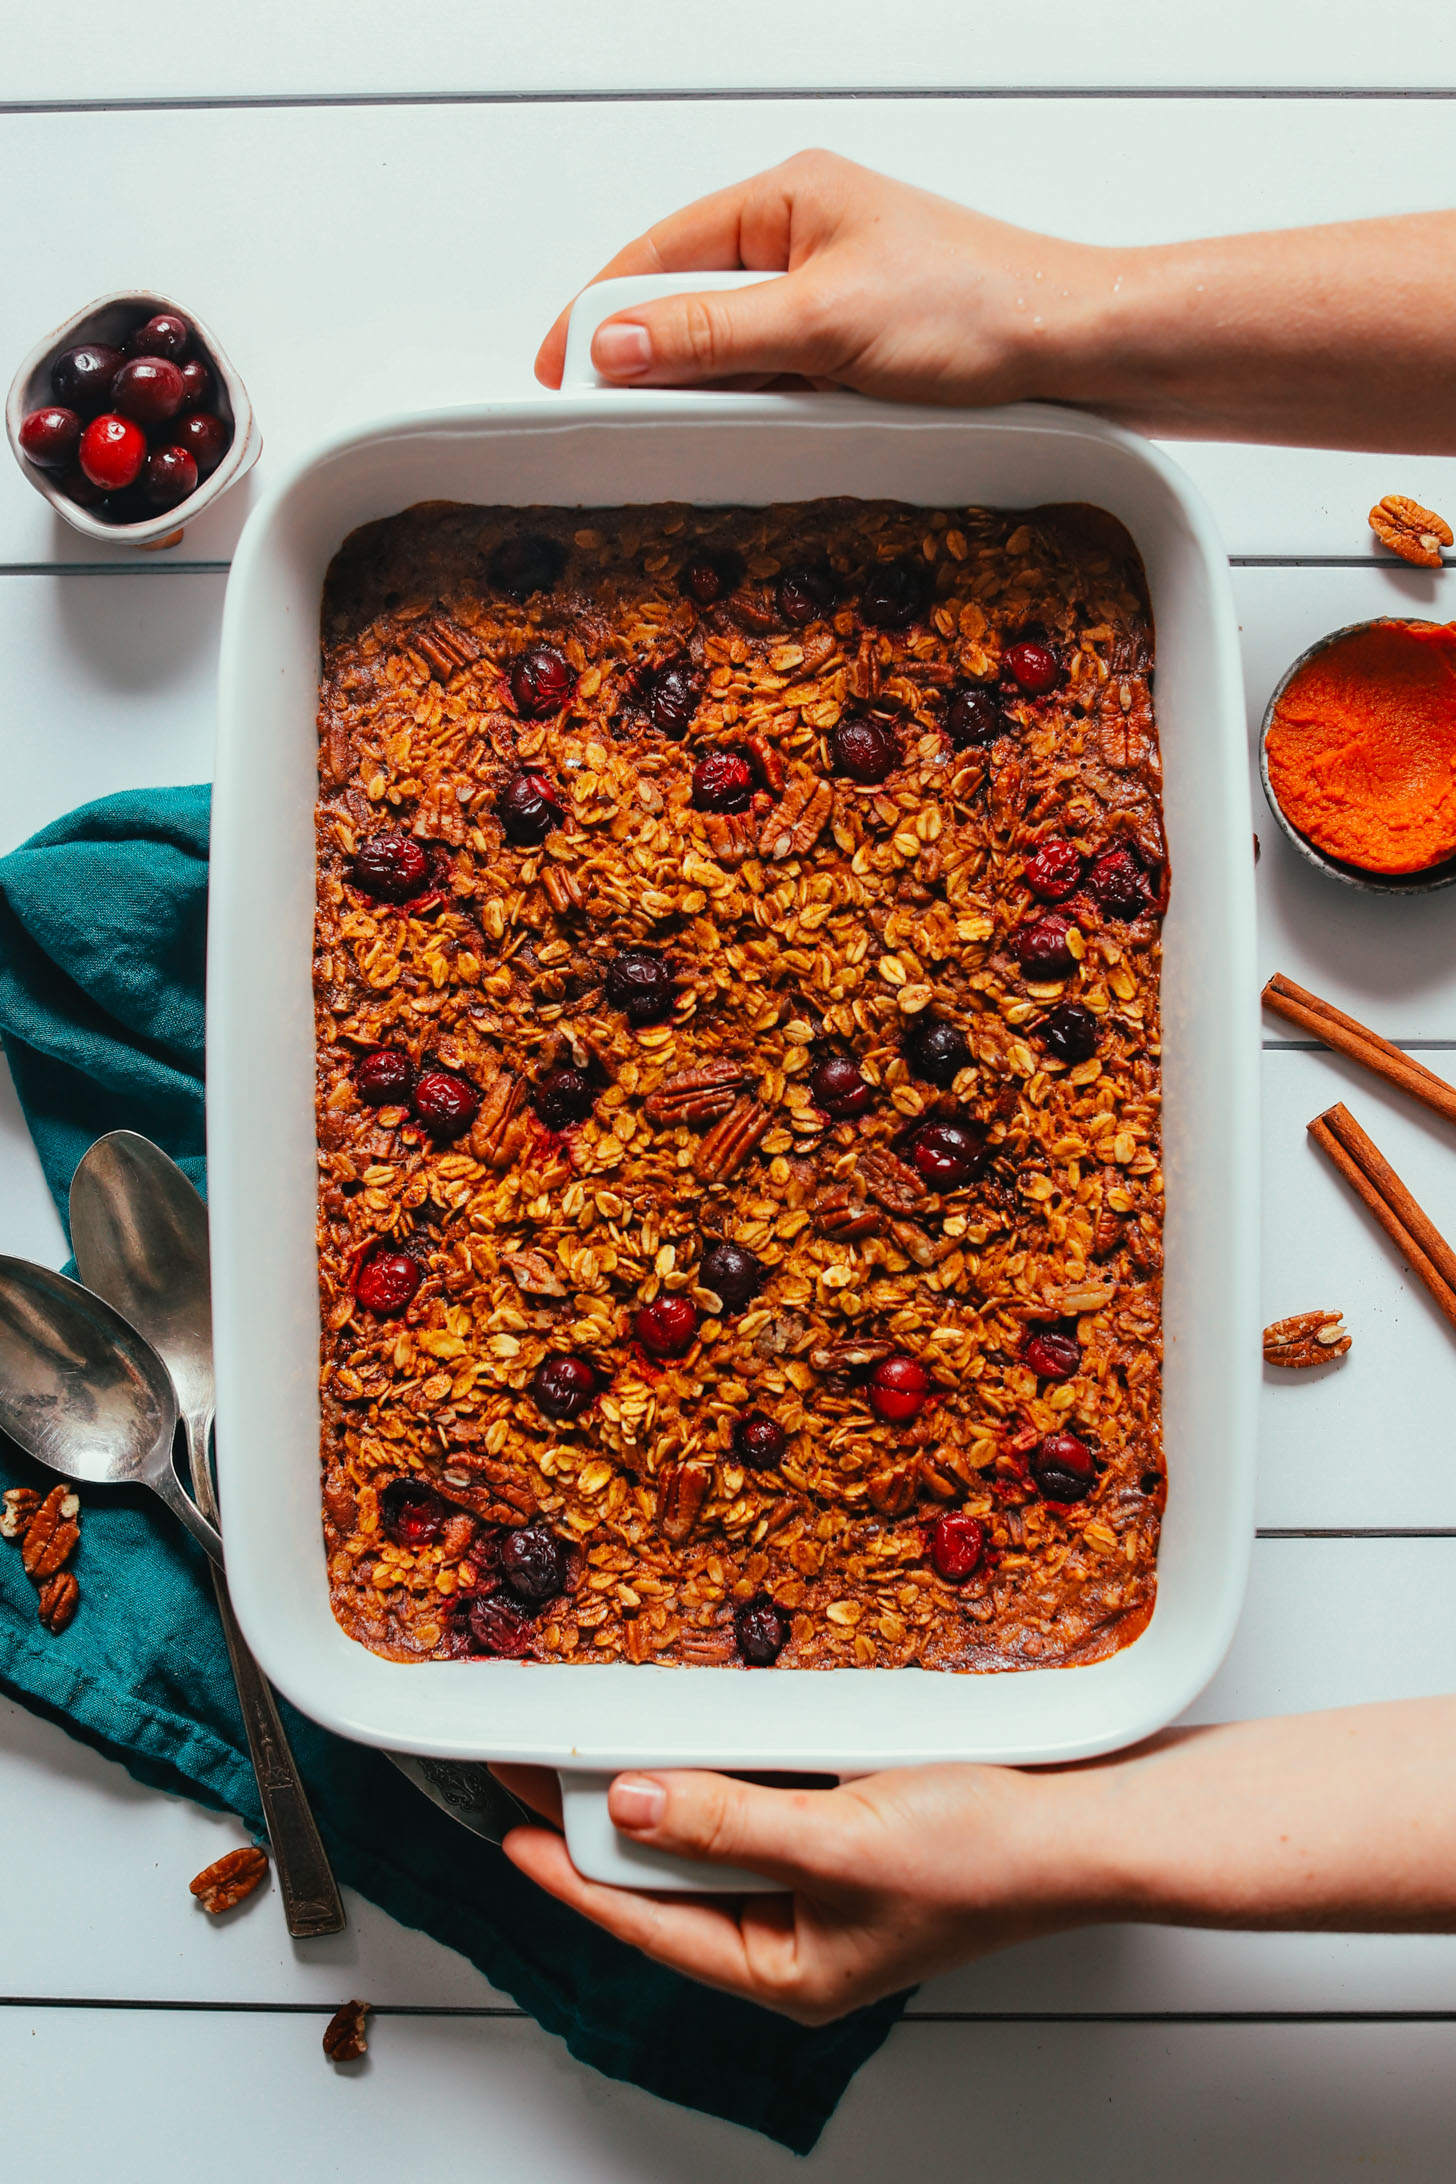 Holding a baking dish filled with naturally sweetened Vegan Pumpkin Baked Oatmeal